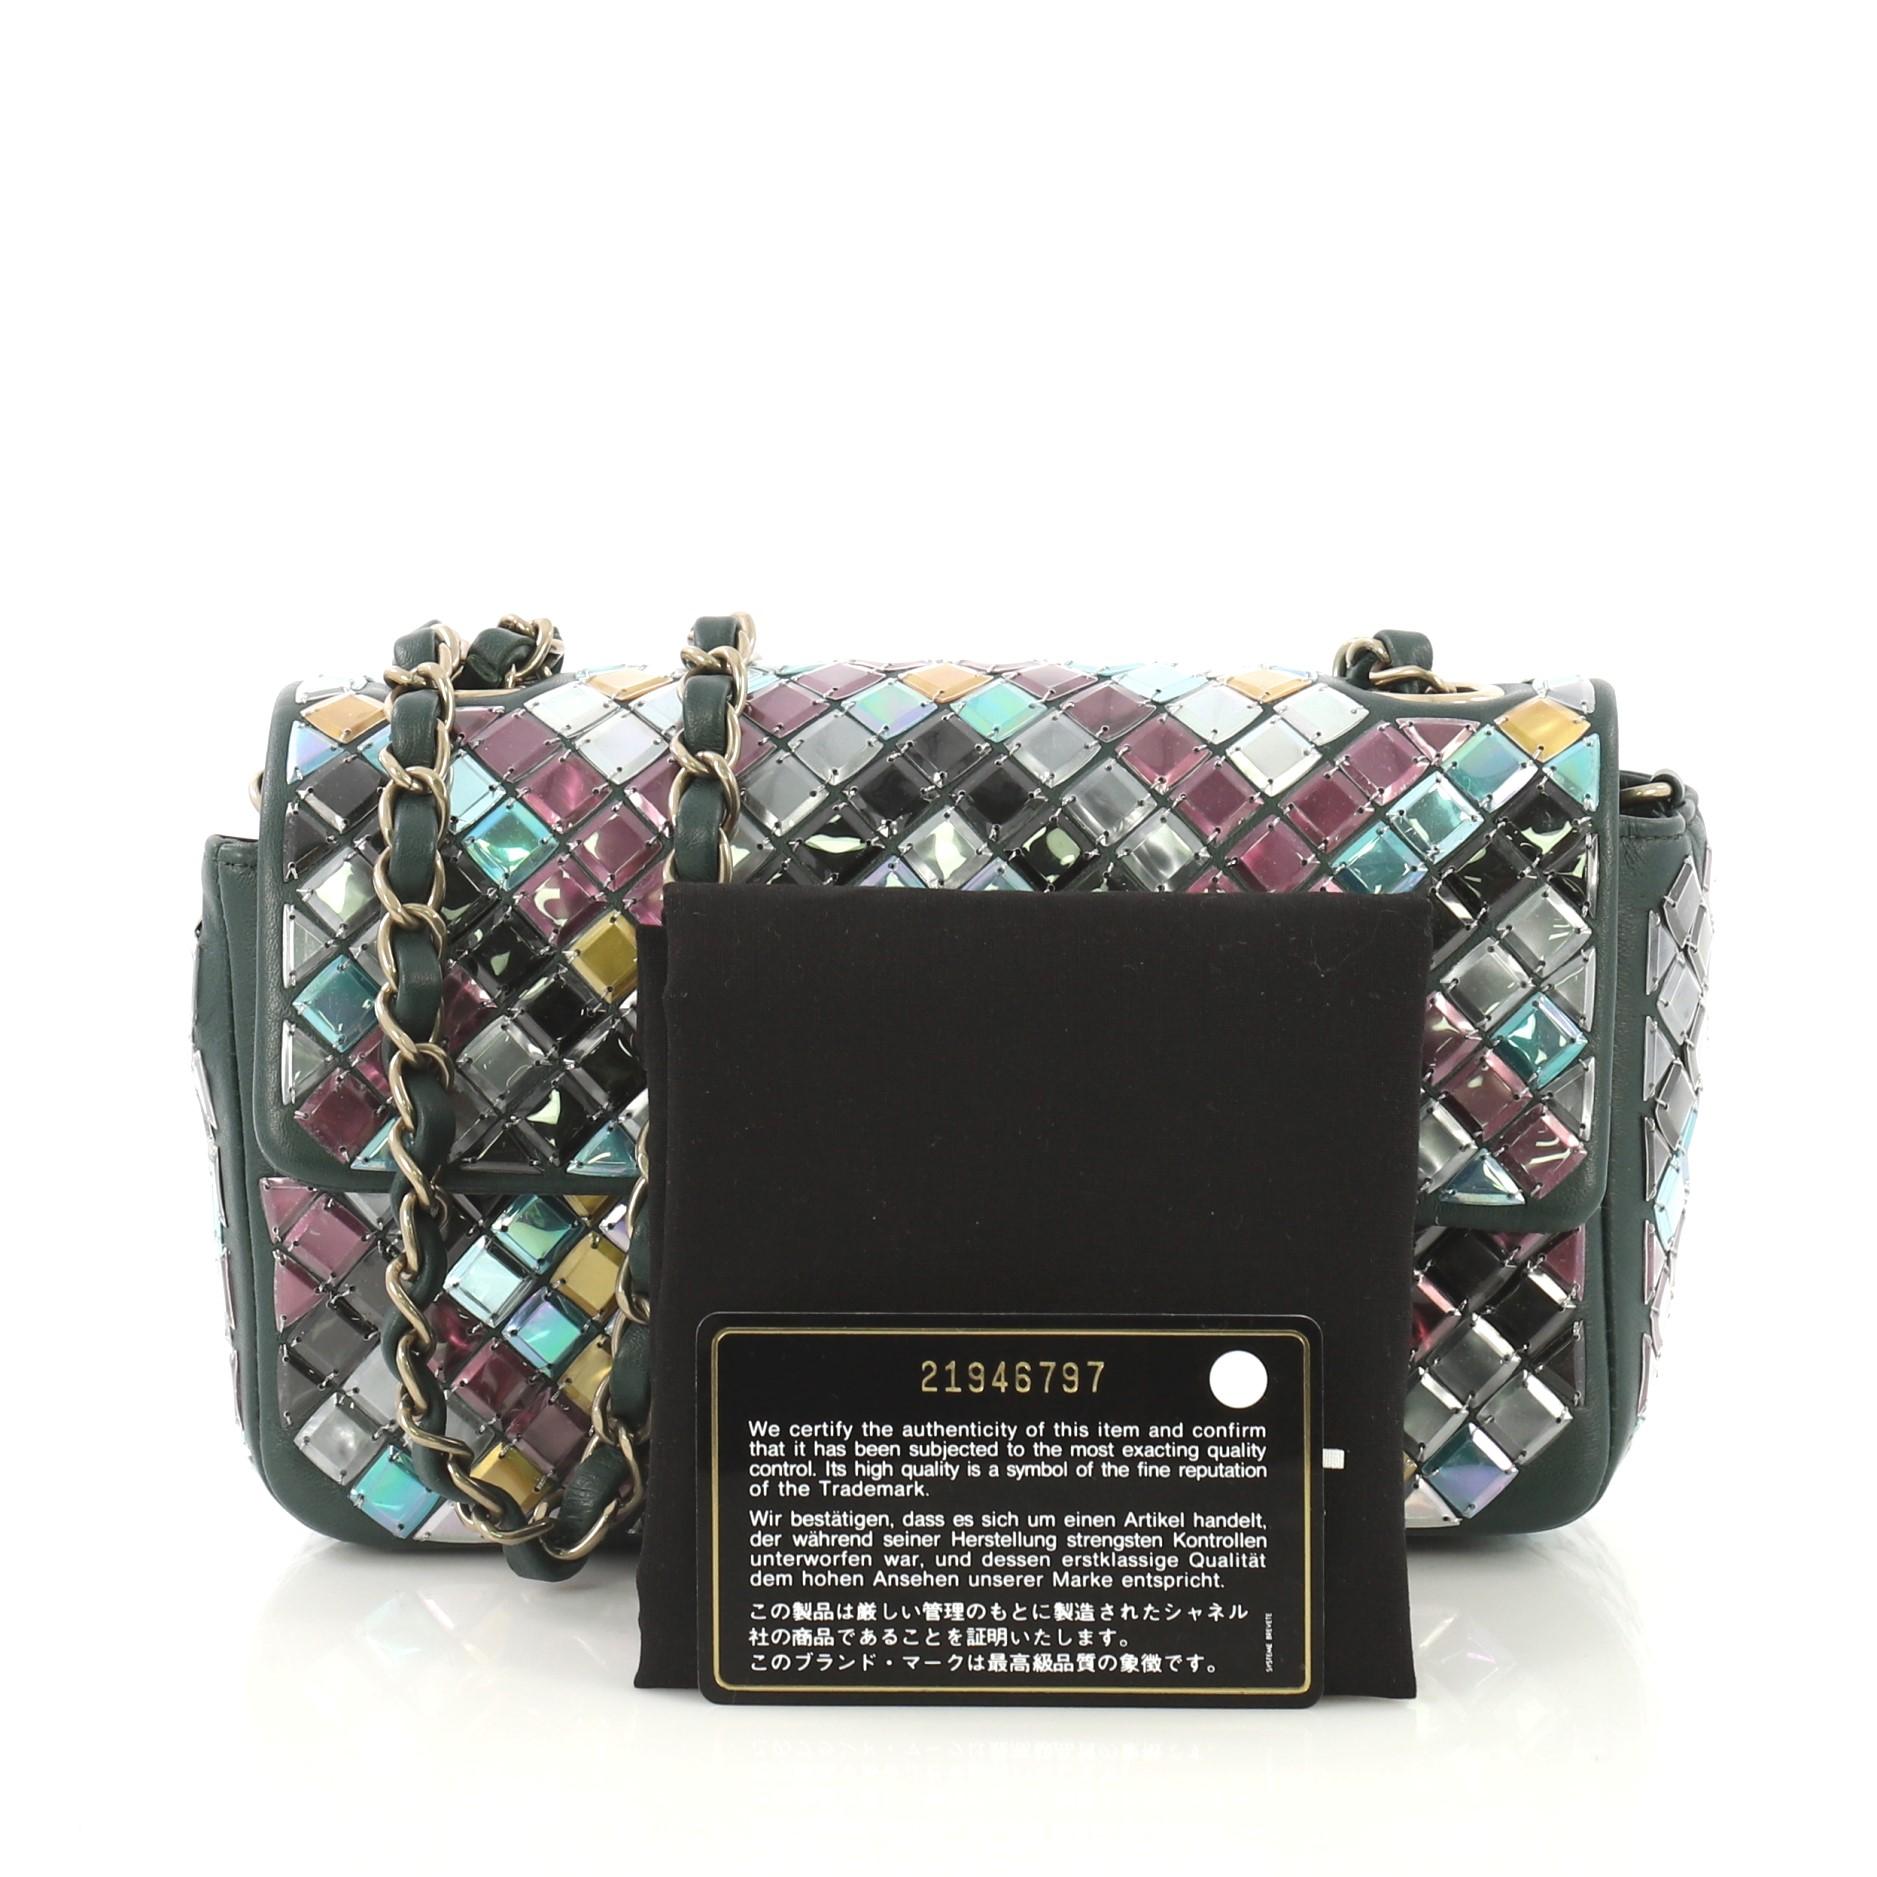 This Chanel Mosaic Flap Bag Embellished Lambskin Small, crafted in green multicolored embellished lambskin leather, features woven-in leather chain strap and gold-tone hardware. Its CC turn-lock closure opens to a green leather interior with zip and